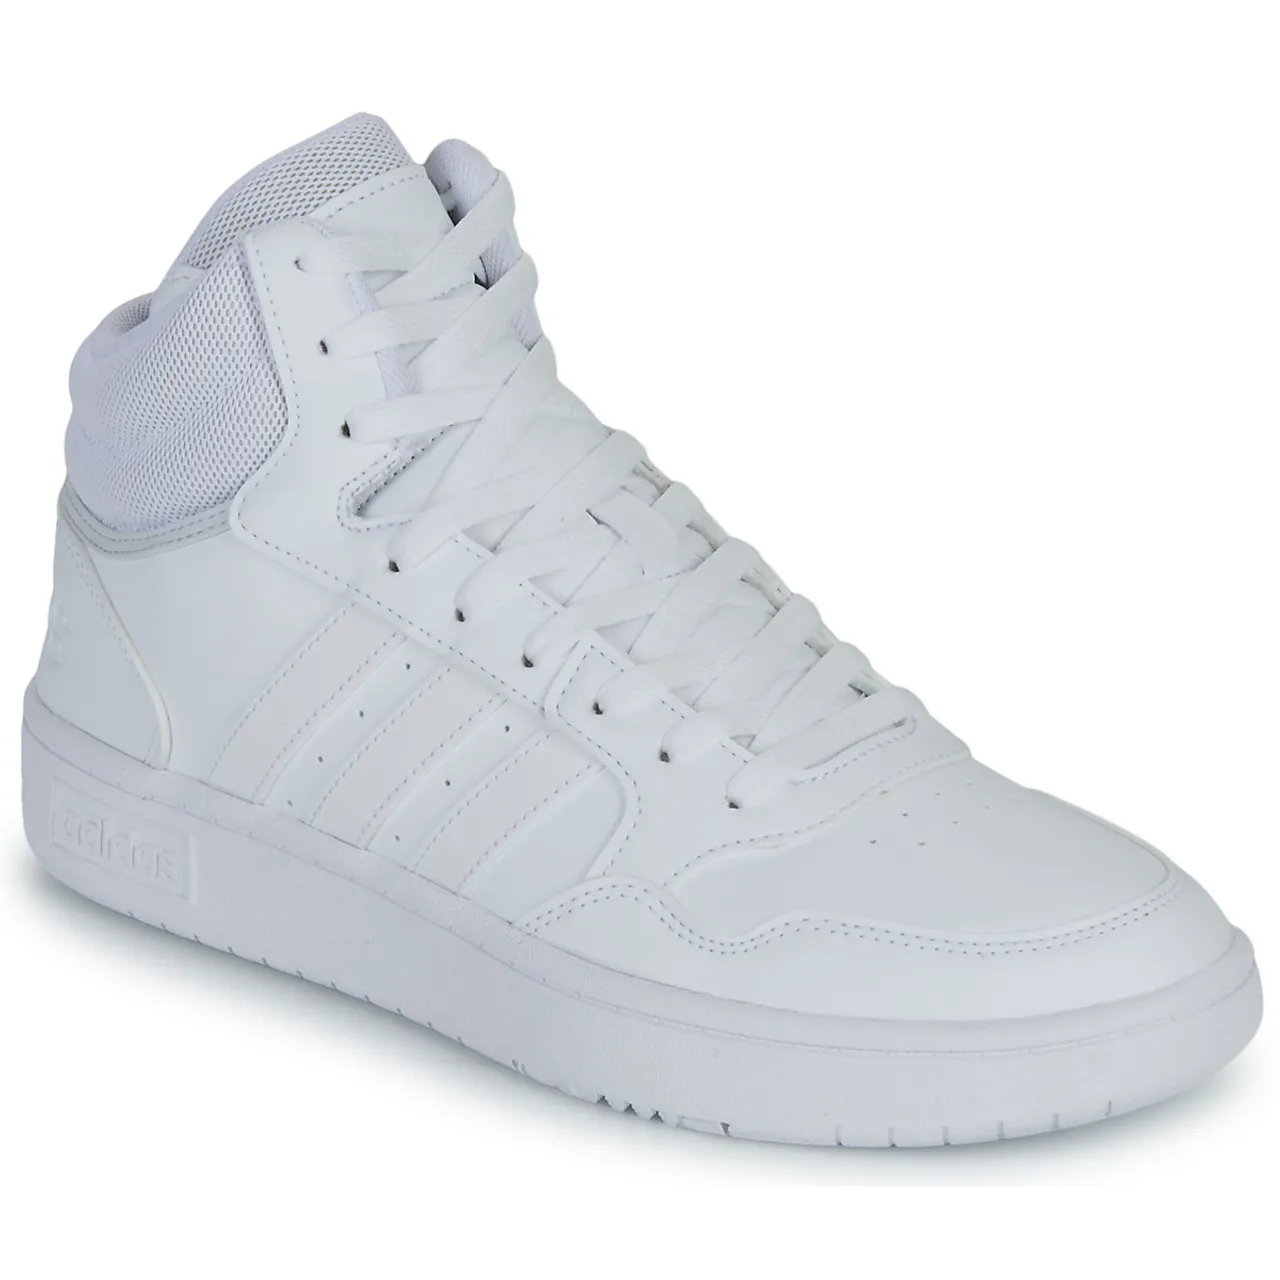 adidas  HOOPS 3.0 MID  women's Shoes (High-top Trainers) in White